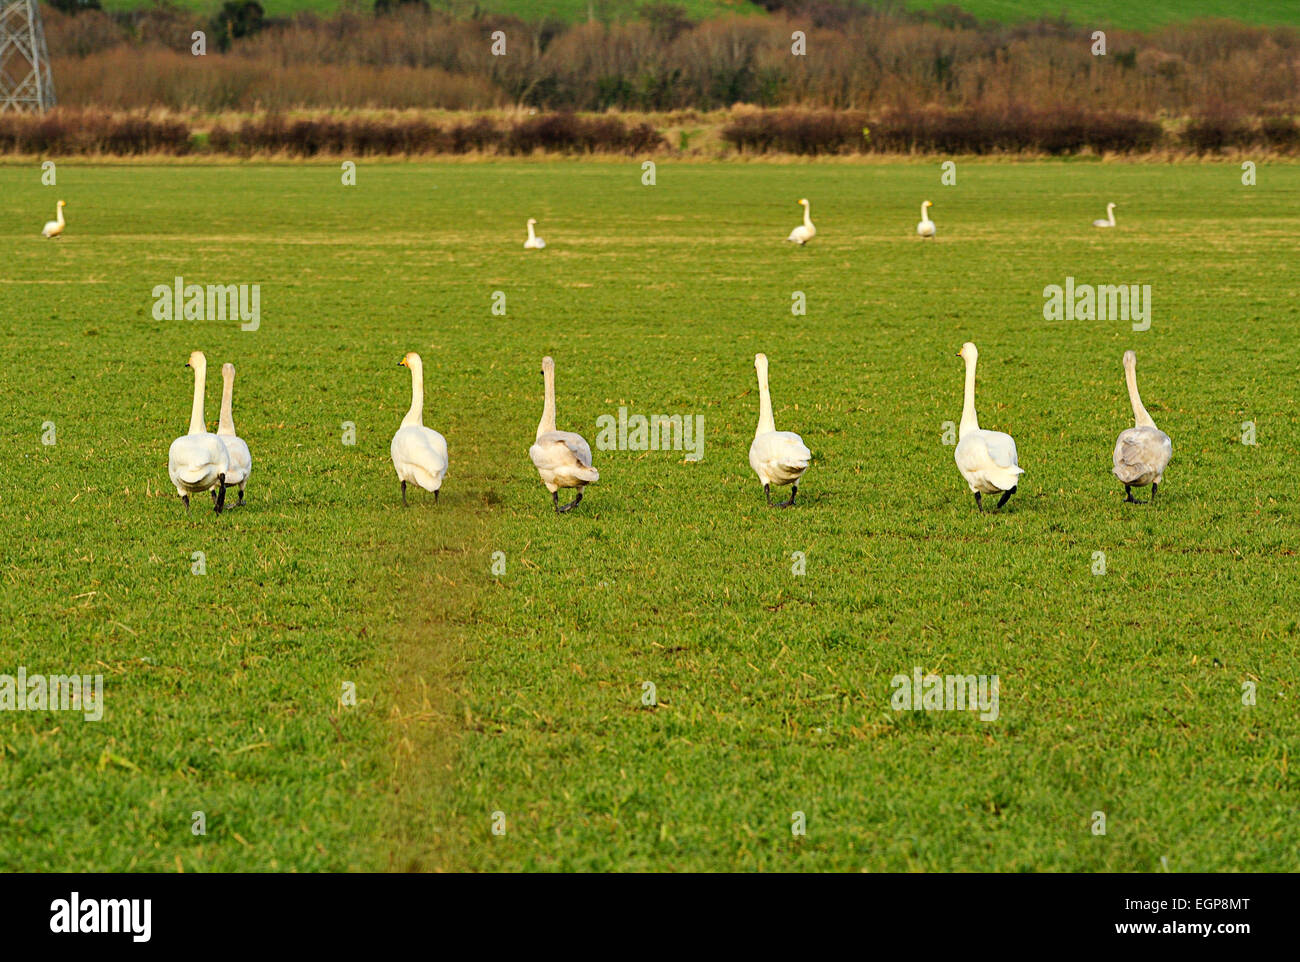 Gaggle of Geese in field in Burnfoot, County Donegal, Ireland. Photo: George Sweeney / alamy Stock Photo